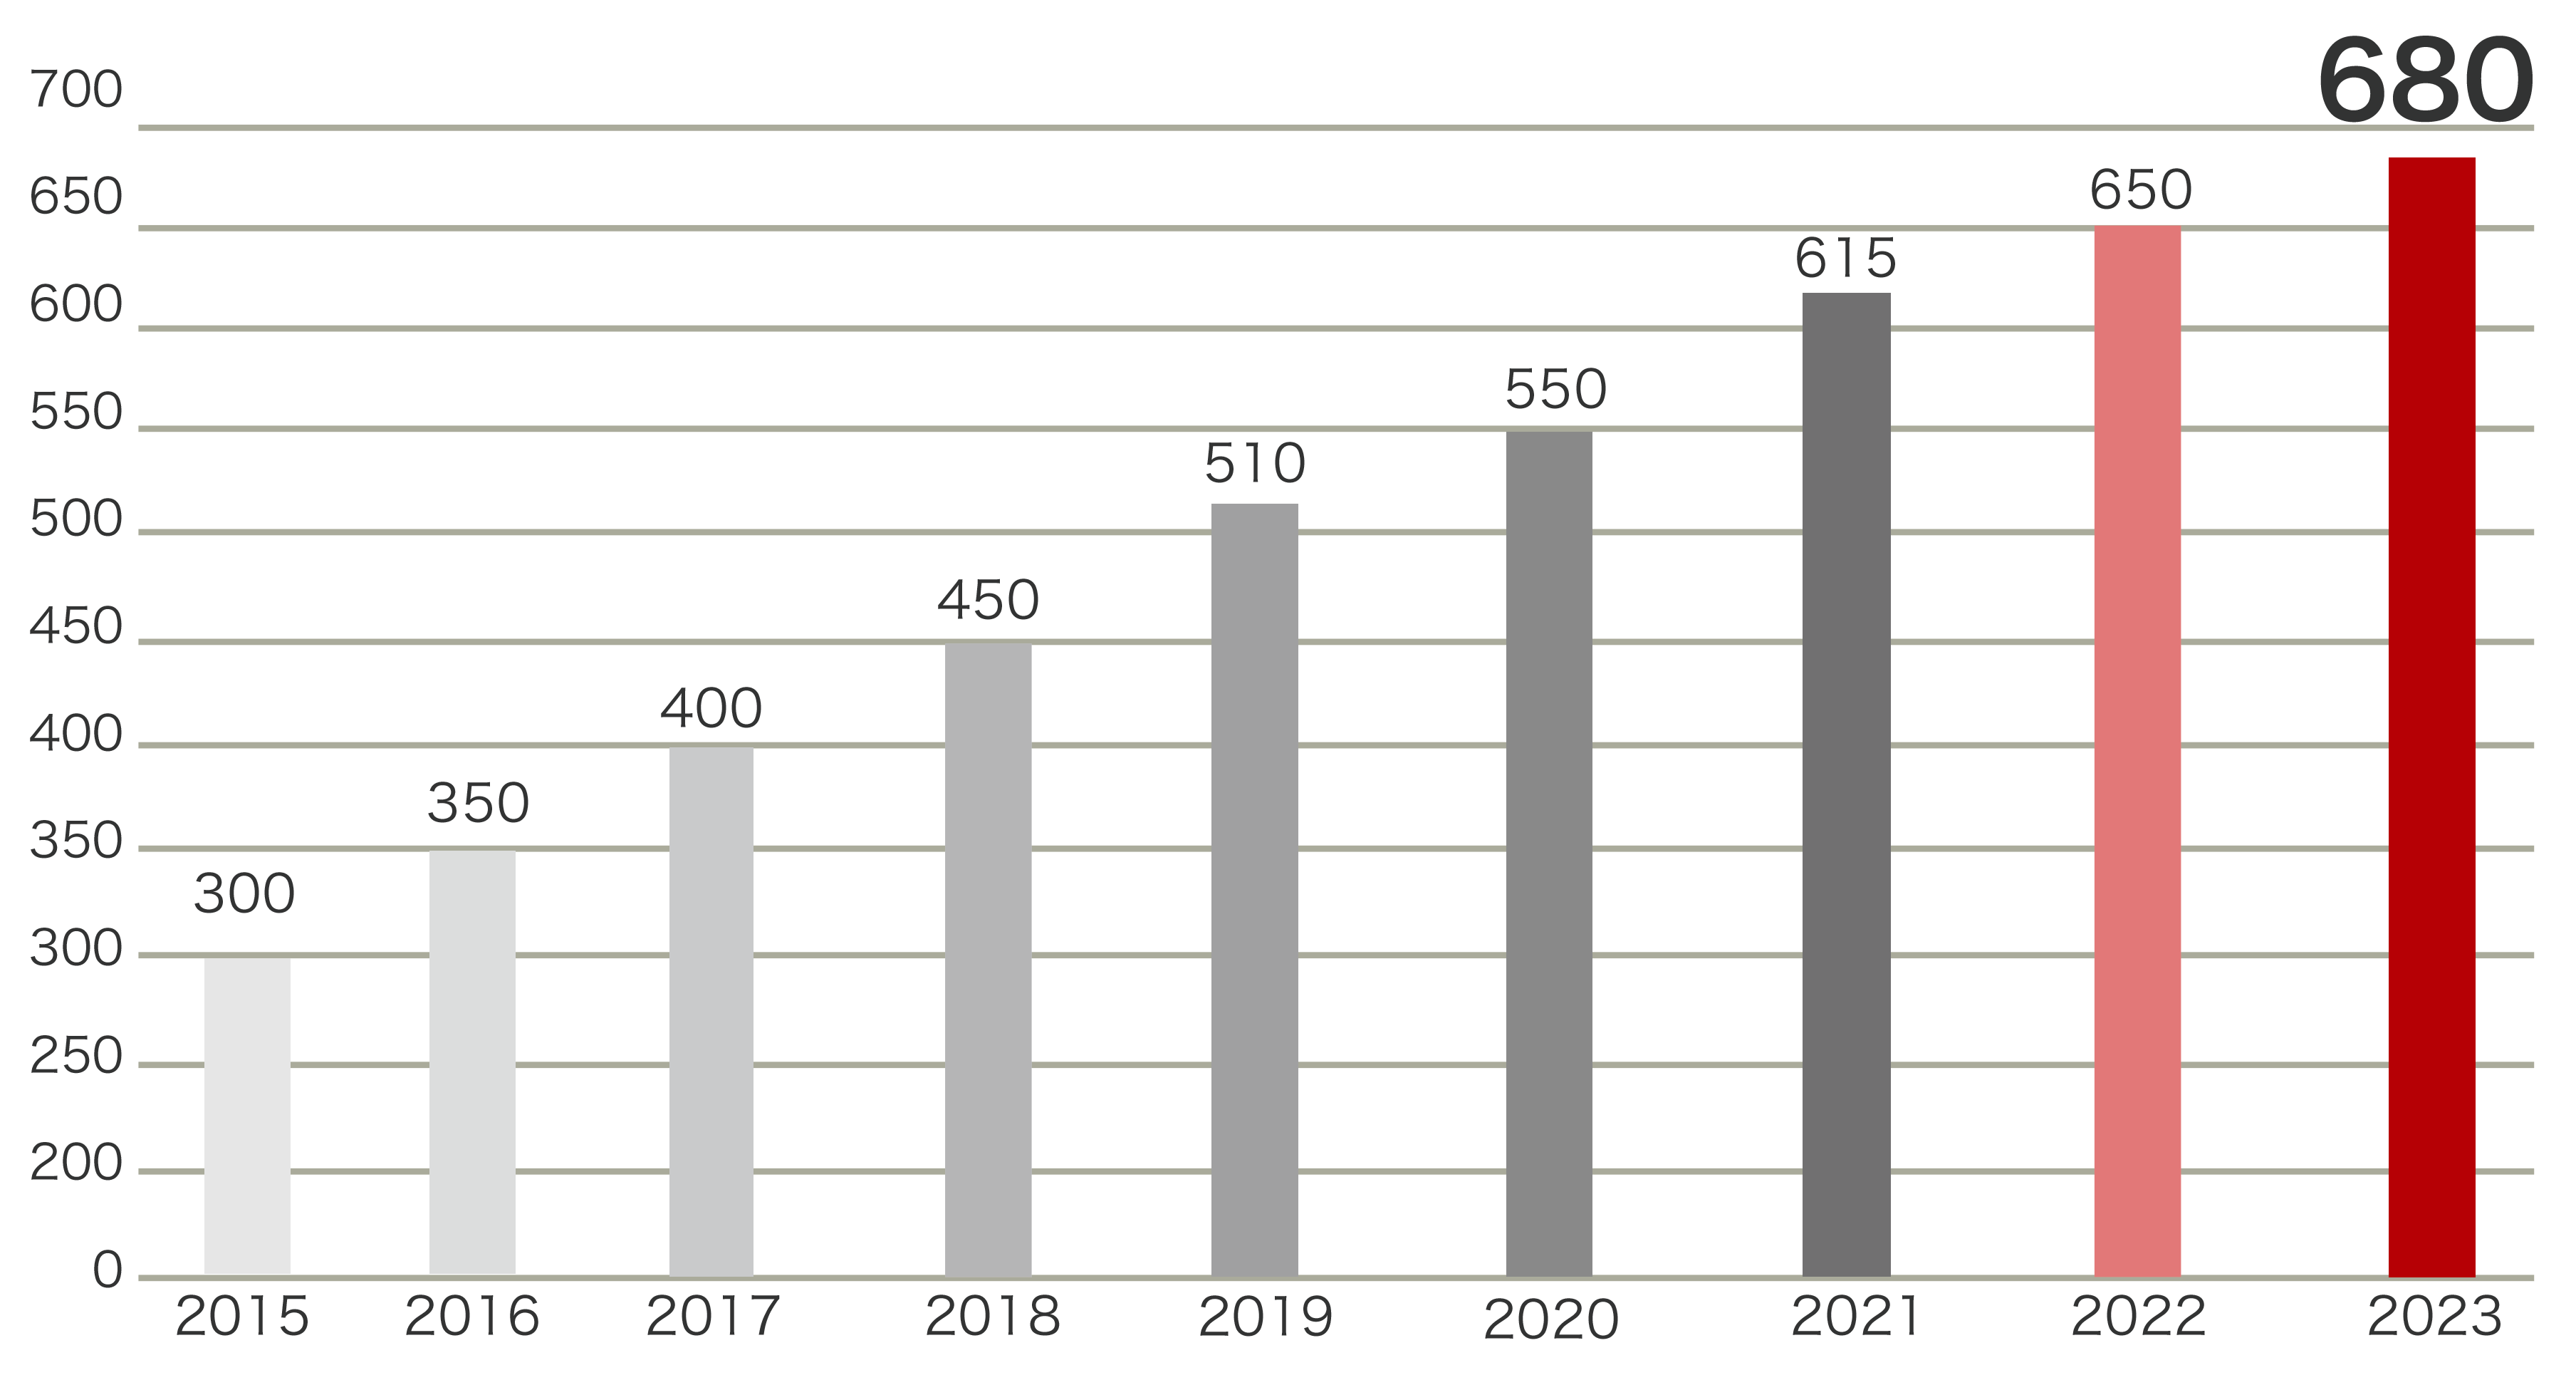 The number of companies introducing 2023 has exceeded 680!